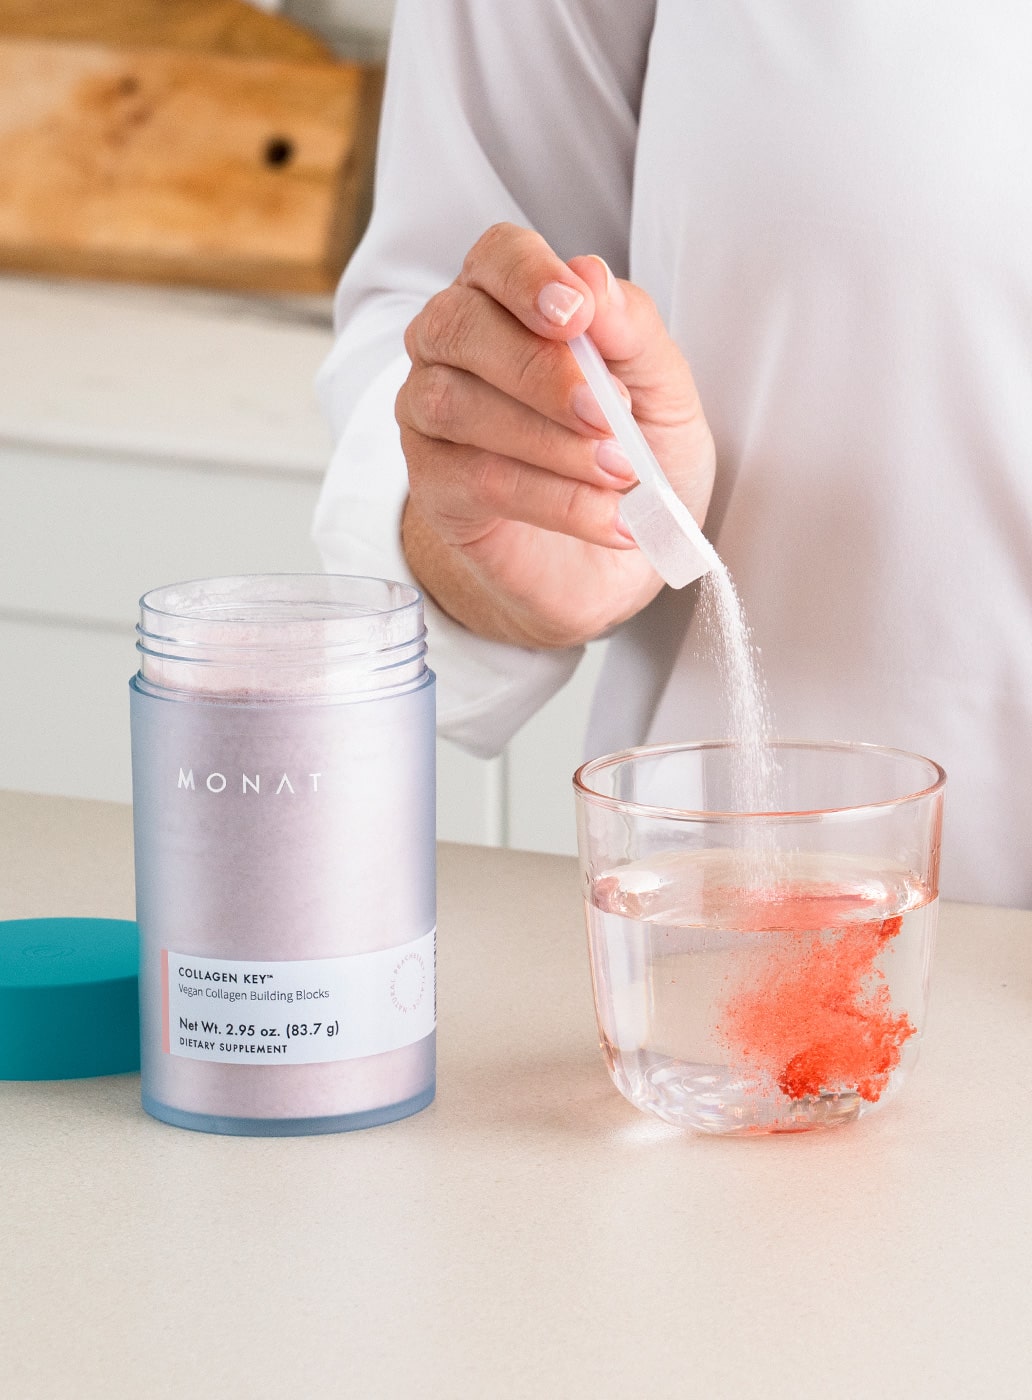 A woman stirring a drink of MONAT COLLAGEN KEY with a spoon